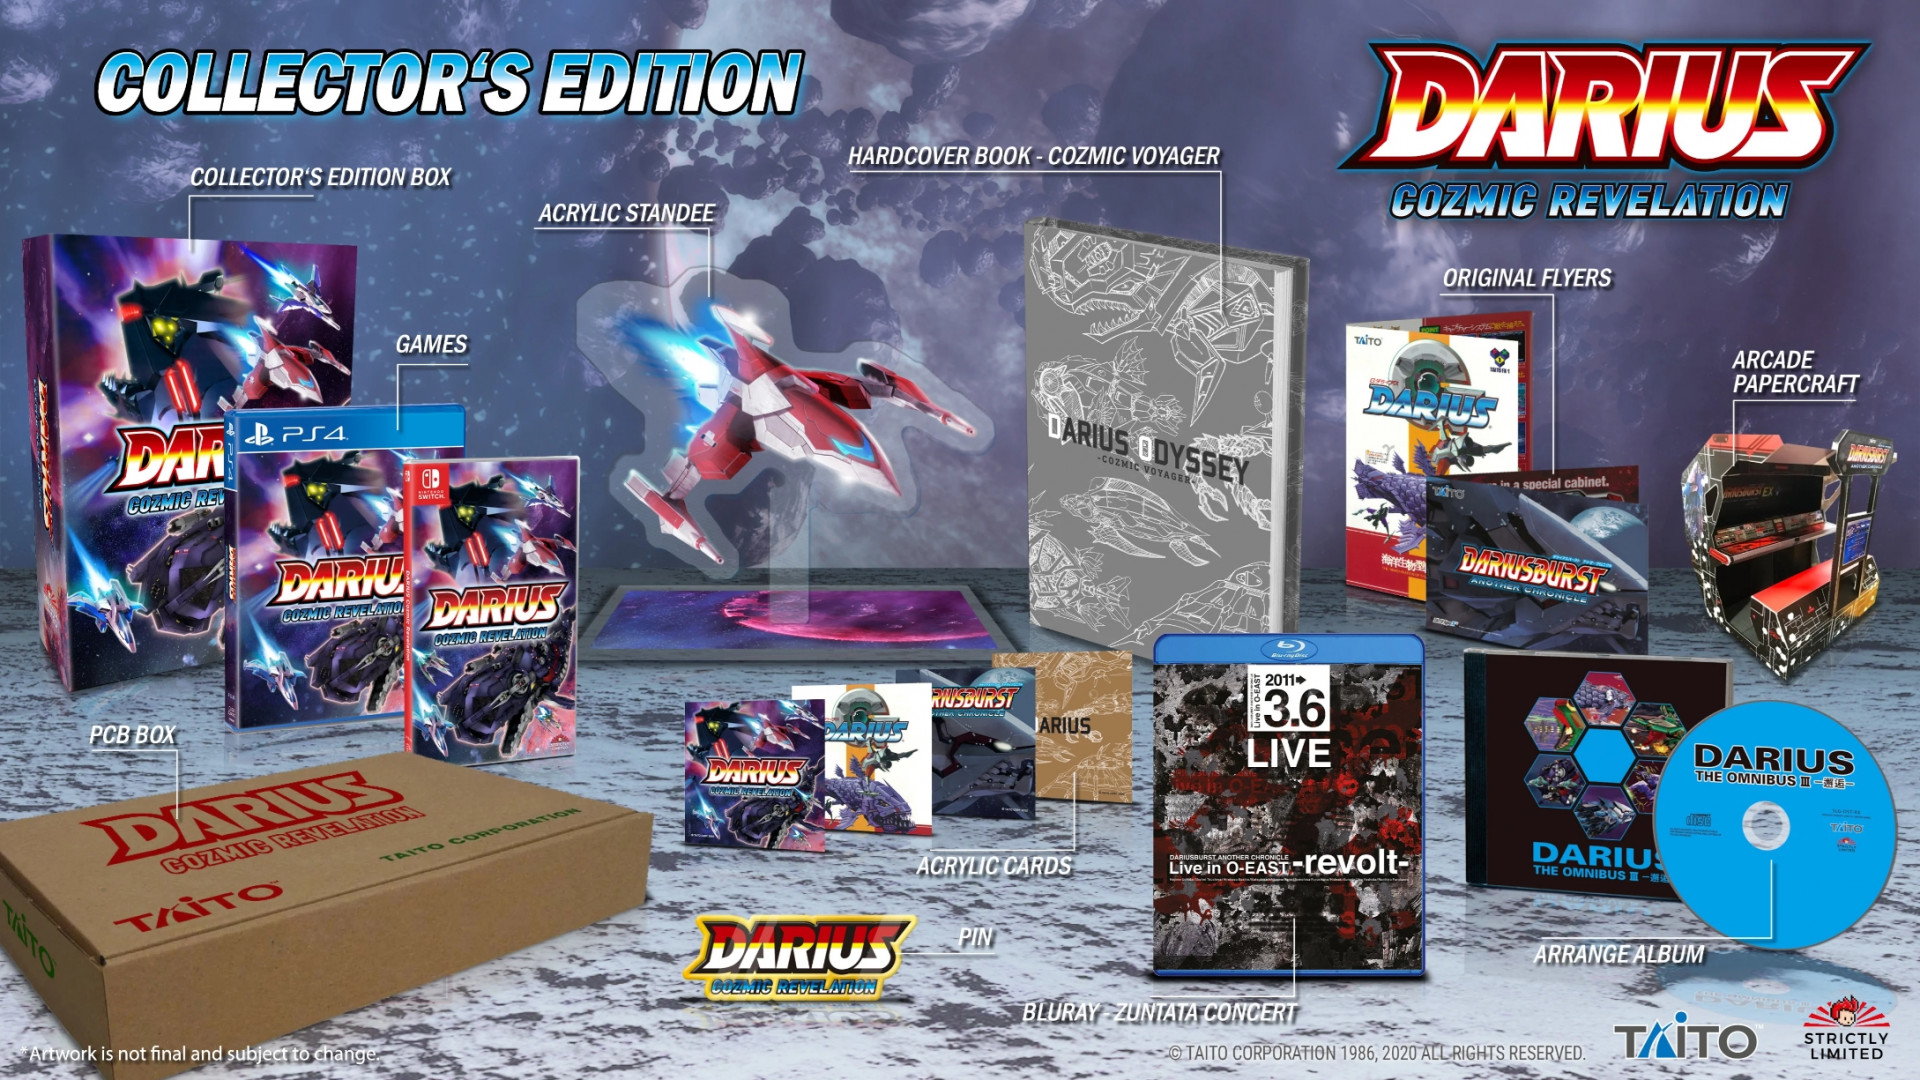 Darius: Cozmic Revelation - Collector's Edition (Strictly Limited) (Switch), Taito Corporation